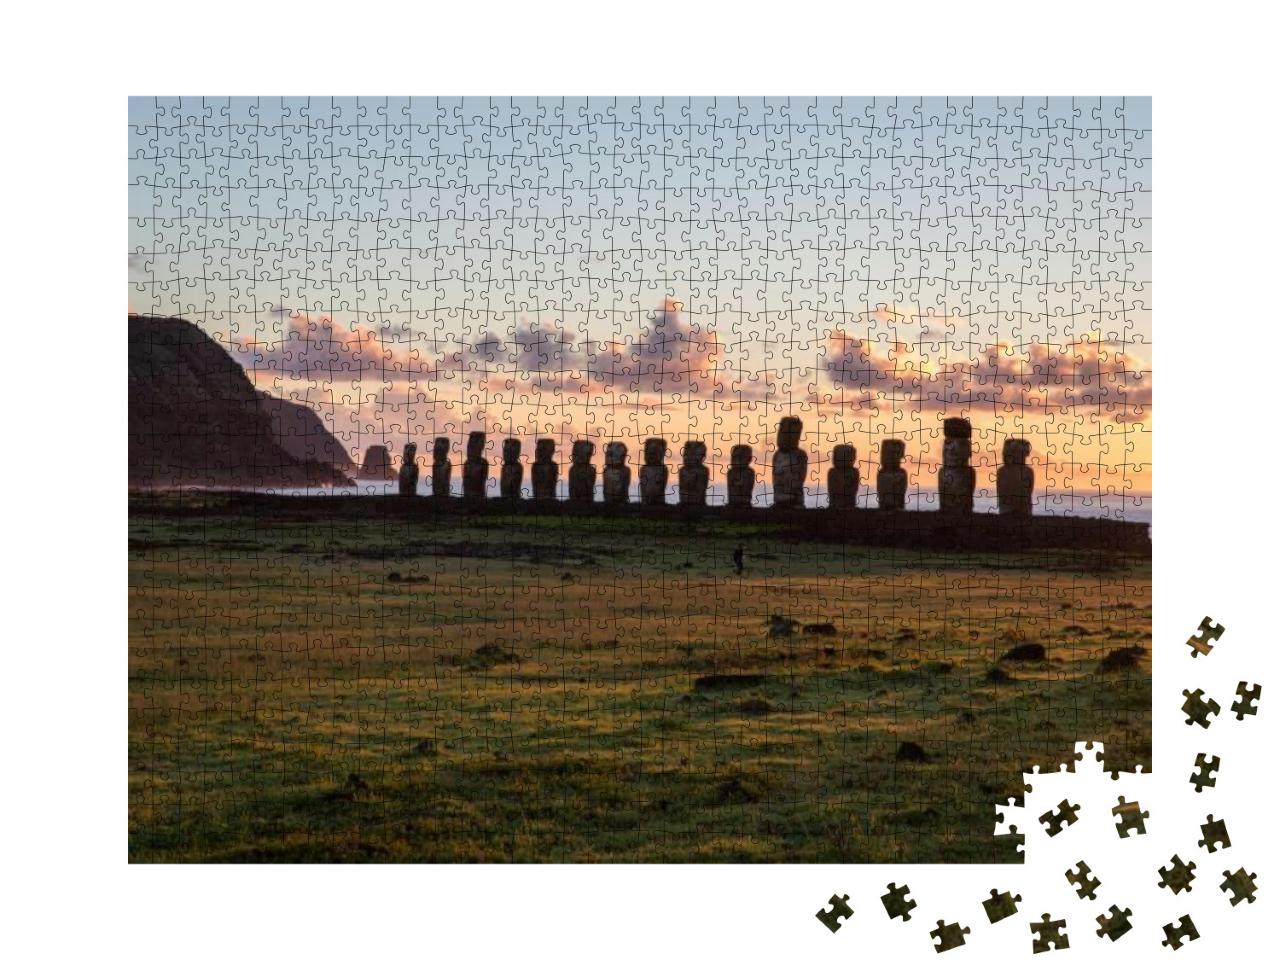 Moai Statues in the Rano Raraku Volcano in Easter Island... Jigsaw Puzzle with 1000 pieces